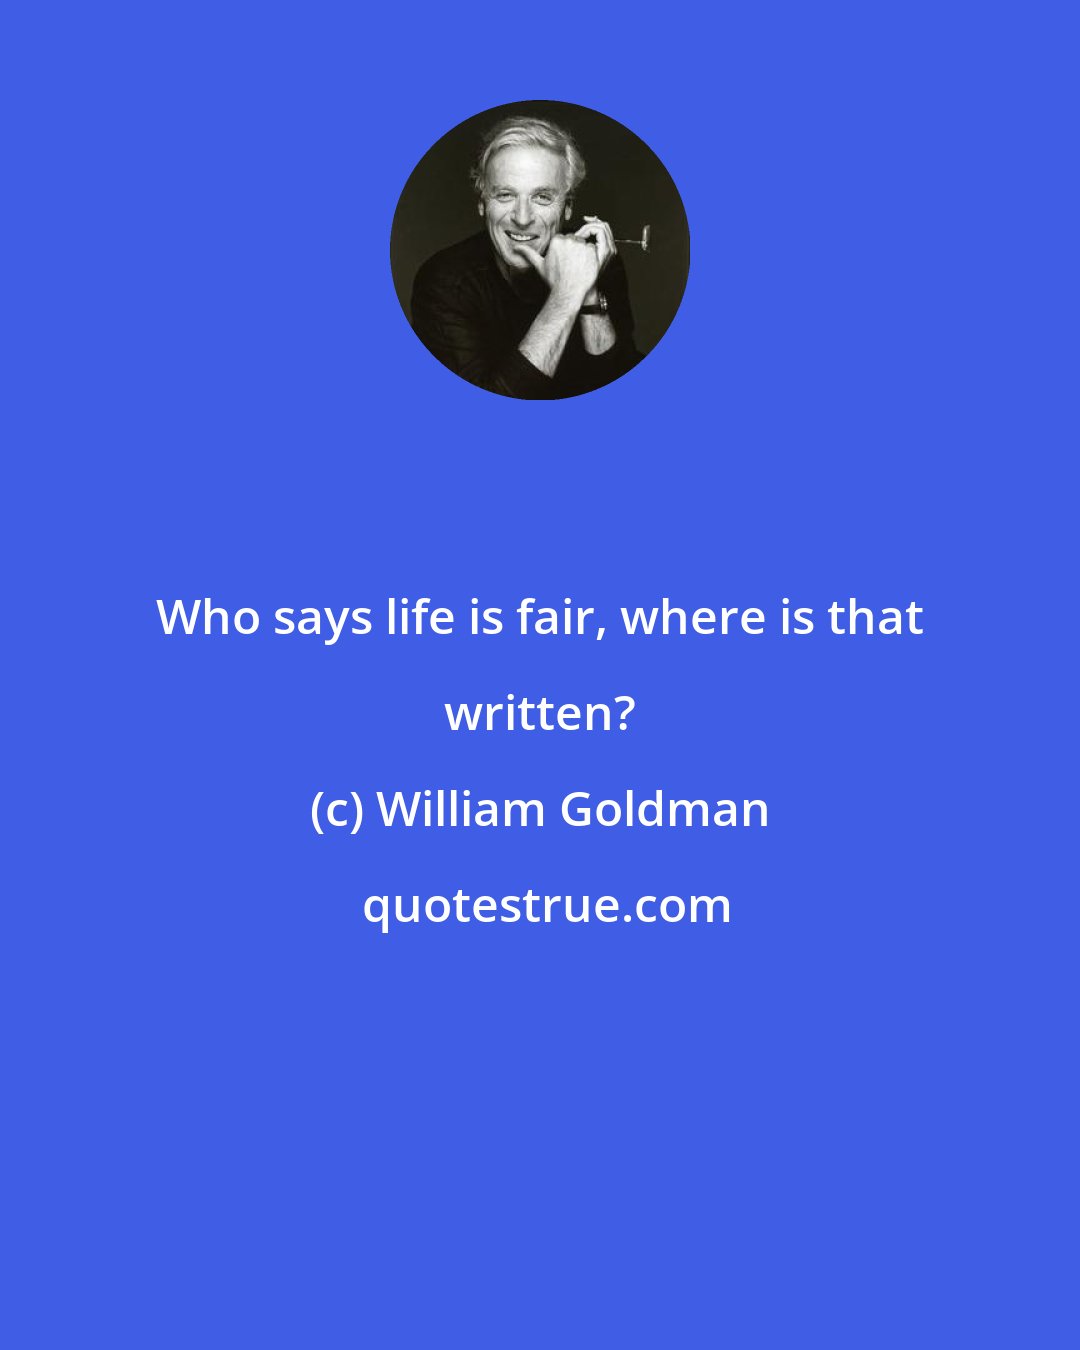 William Goldman: Who says life is fair, where is that written?